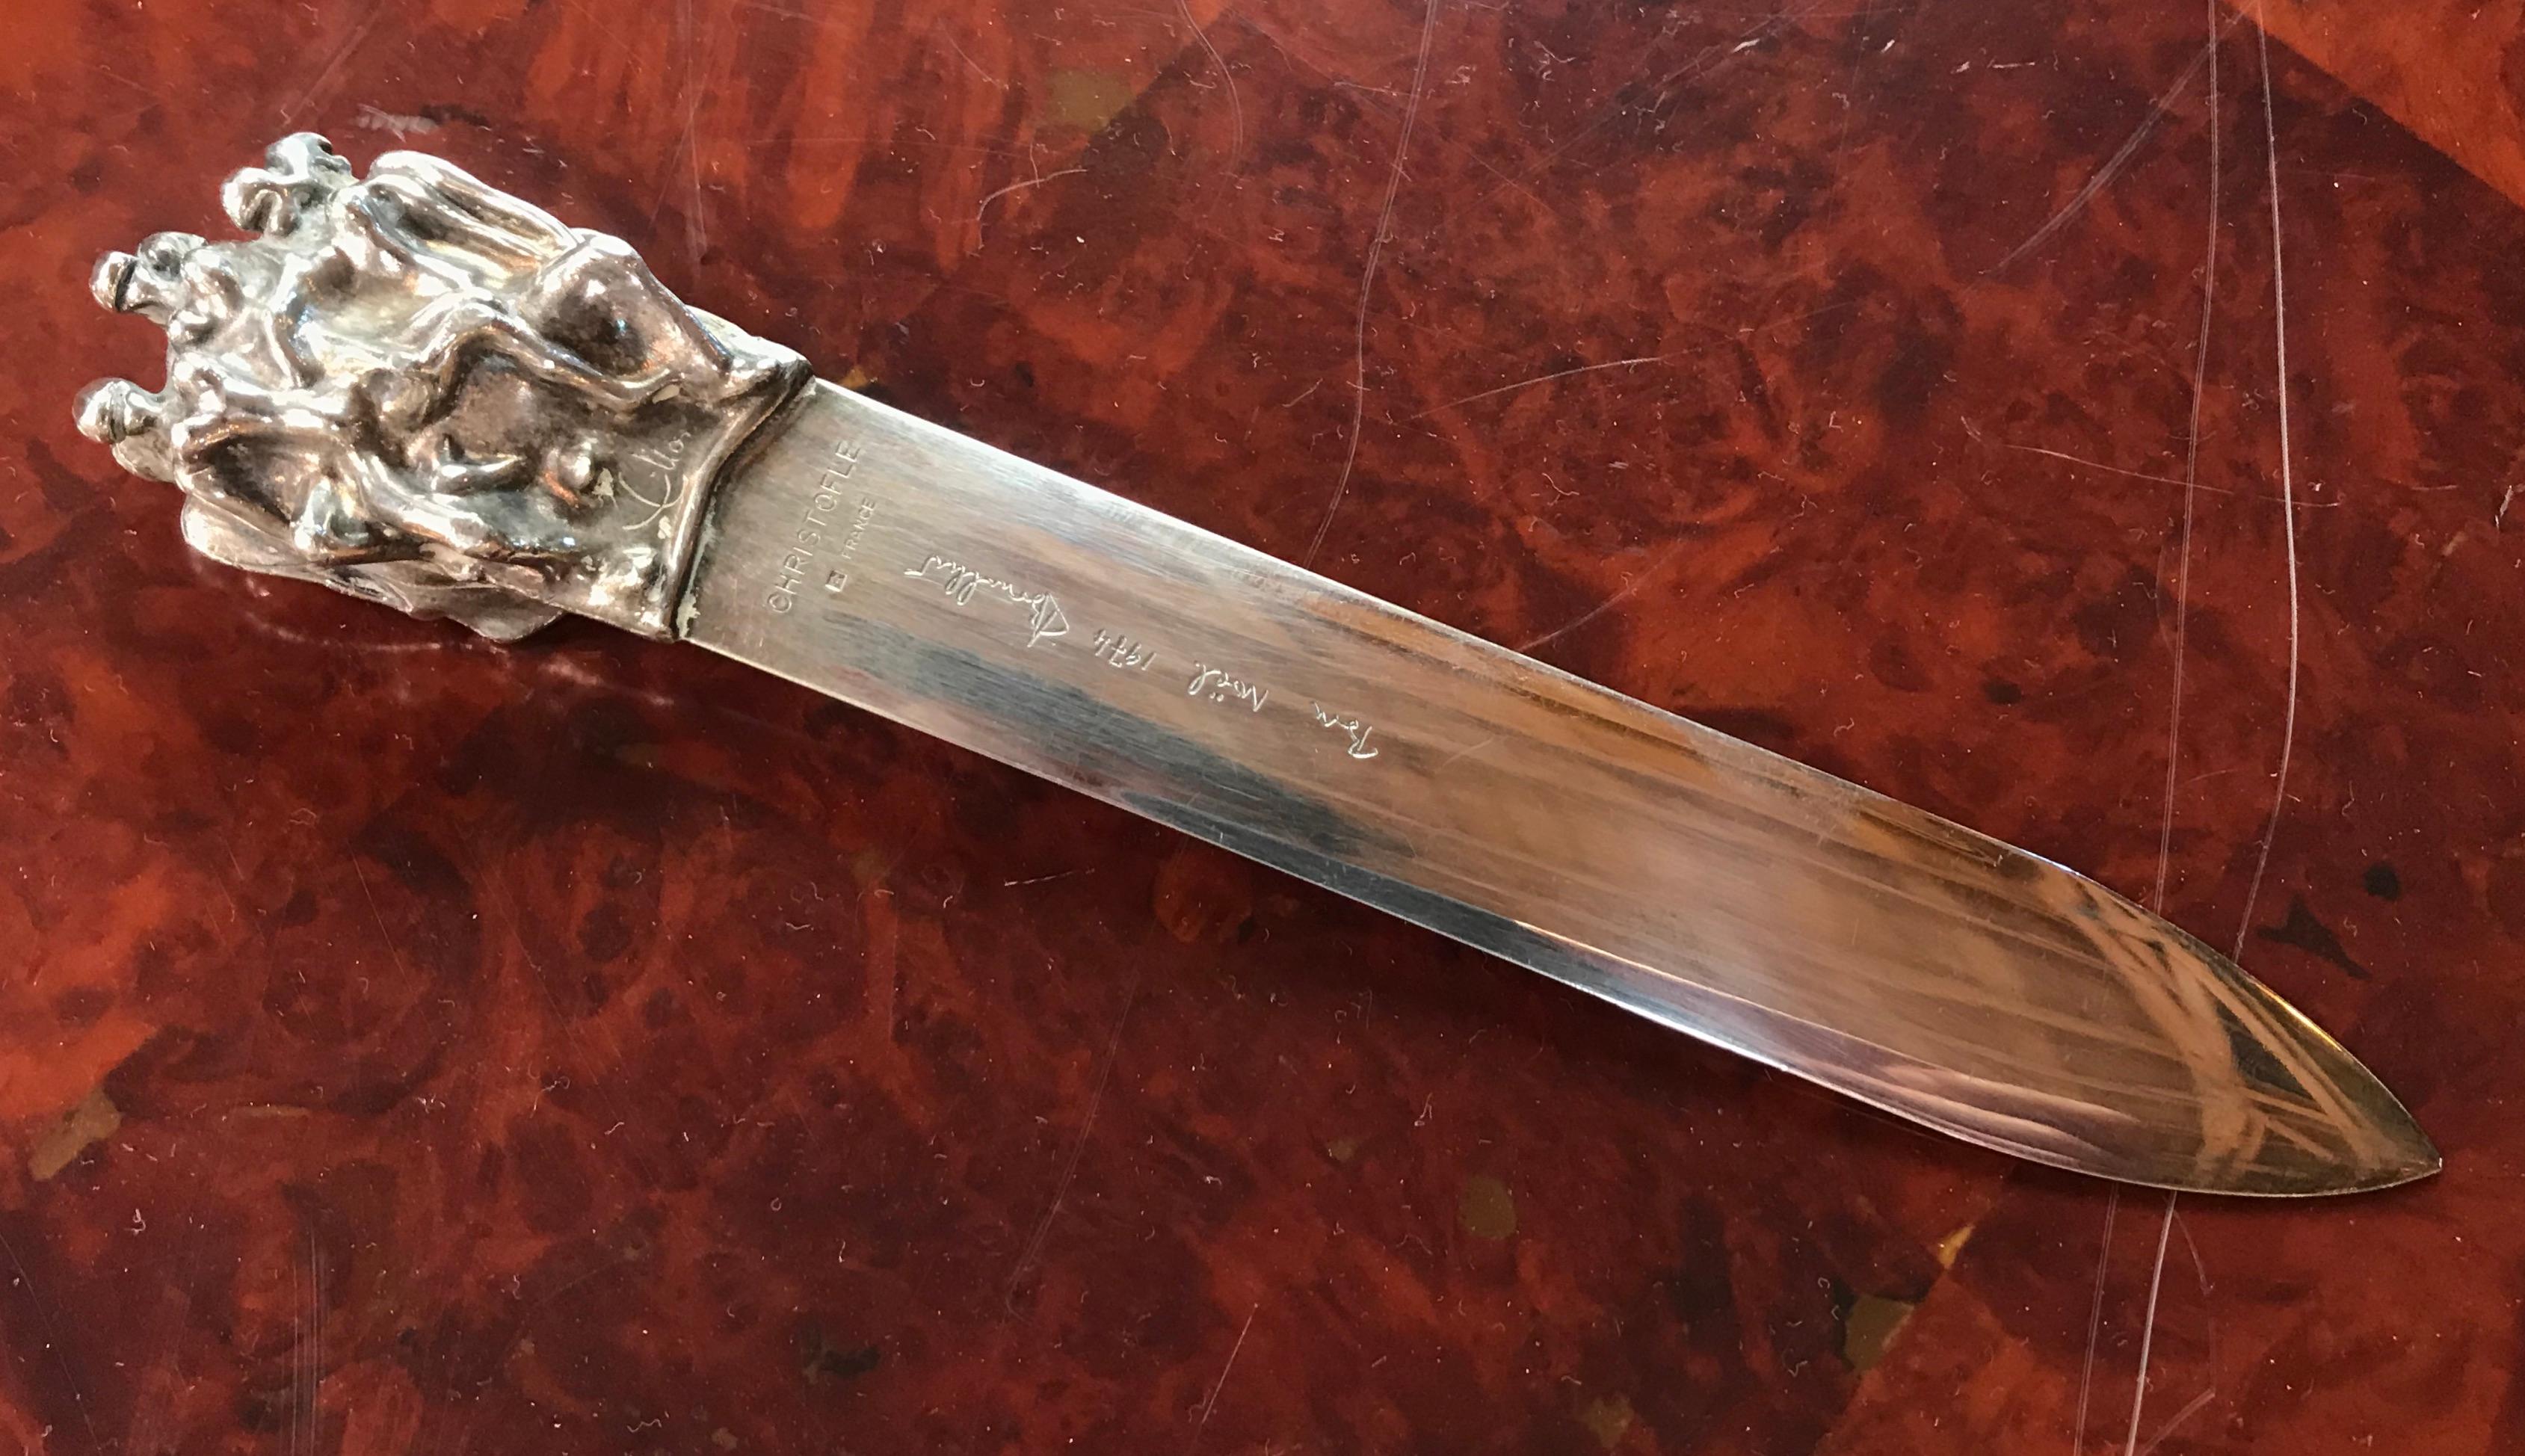 Midcentury silvered erotic letter opener or bookmark with nudes by the French artist Jean Filhos, (1921-2002)
This model was created as the official 1974 Christofle Christmas gift (source: Christofle Museum and Archives service)
Signed 